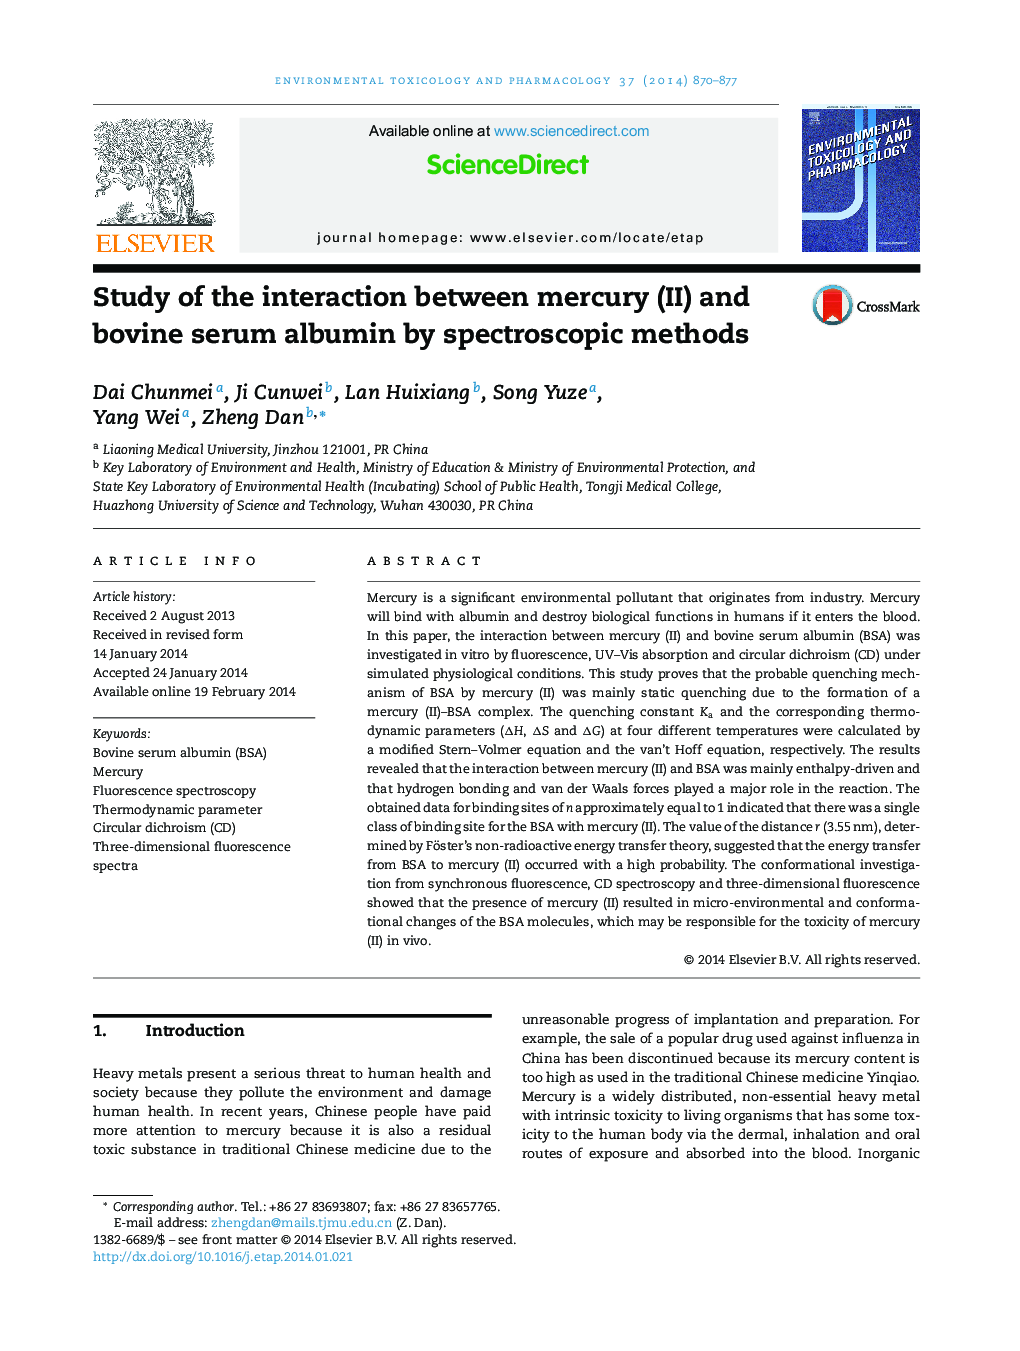 Study of the interaction between mercury (II) and bovine serum albumin by spectroscopic methods